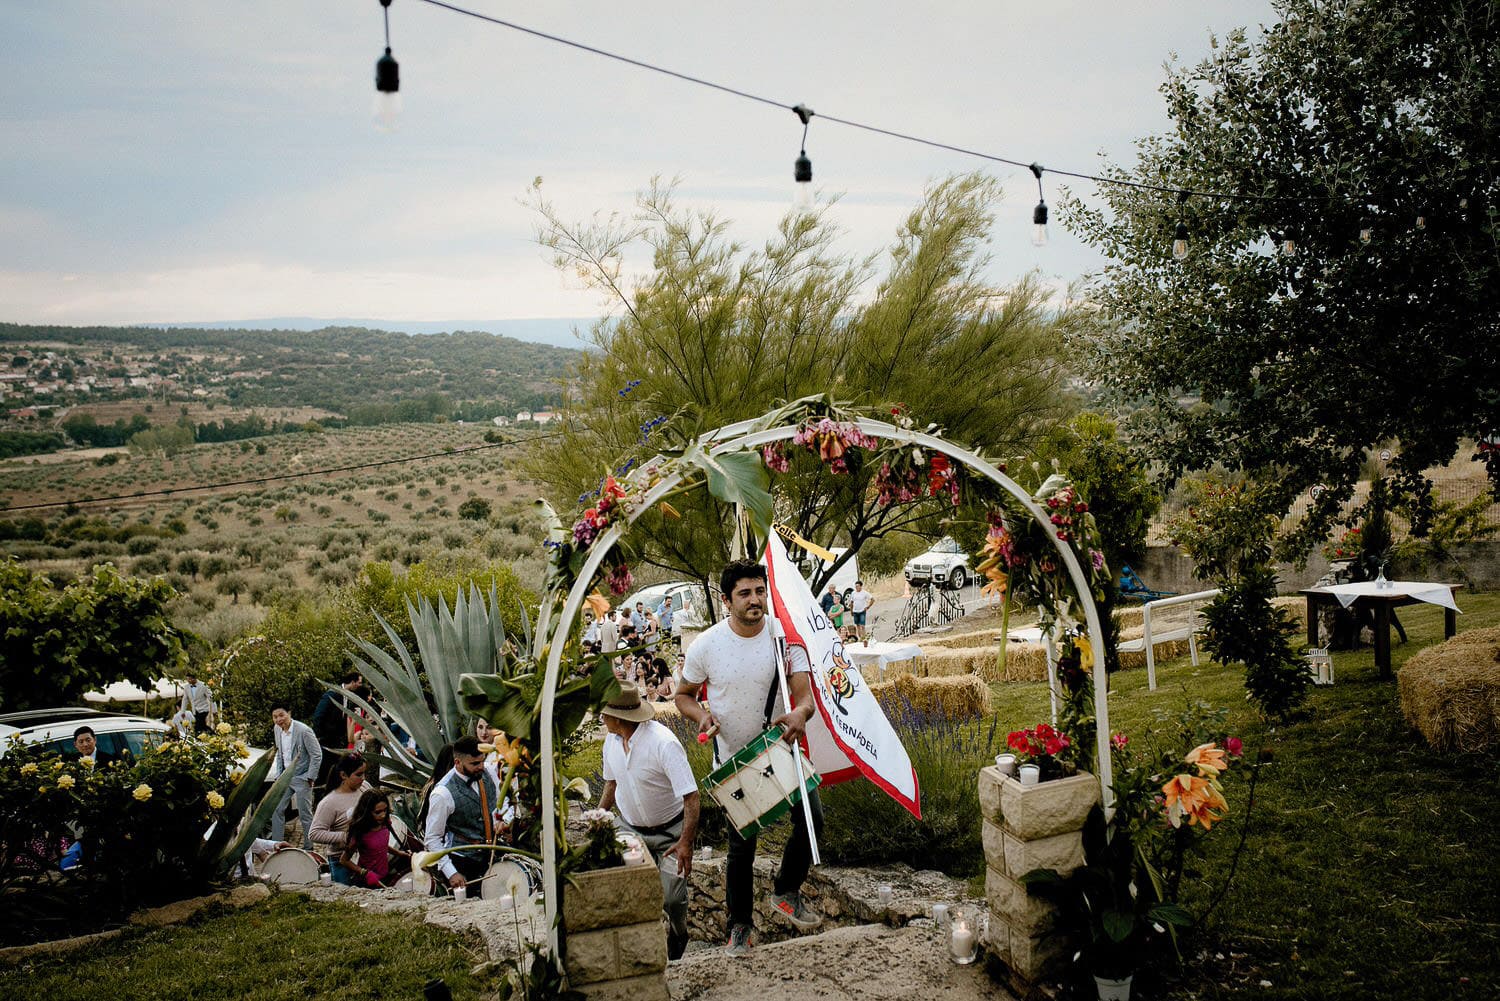 Charming Destination Wedding in the Portuguese Countryside - local village percussion band at the backyard wedding reception